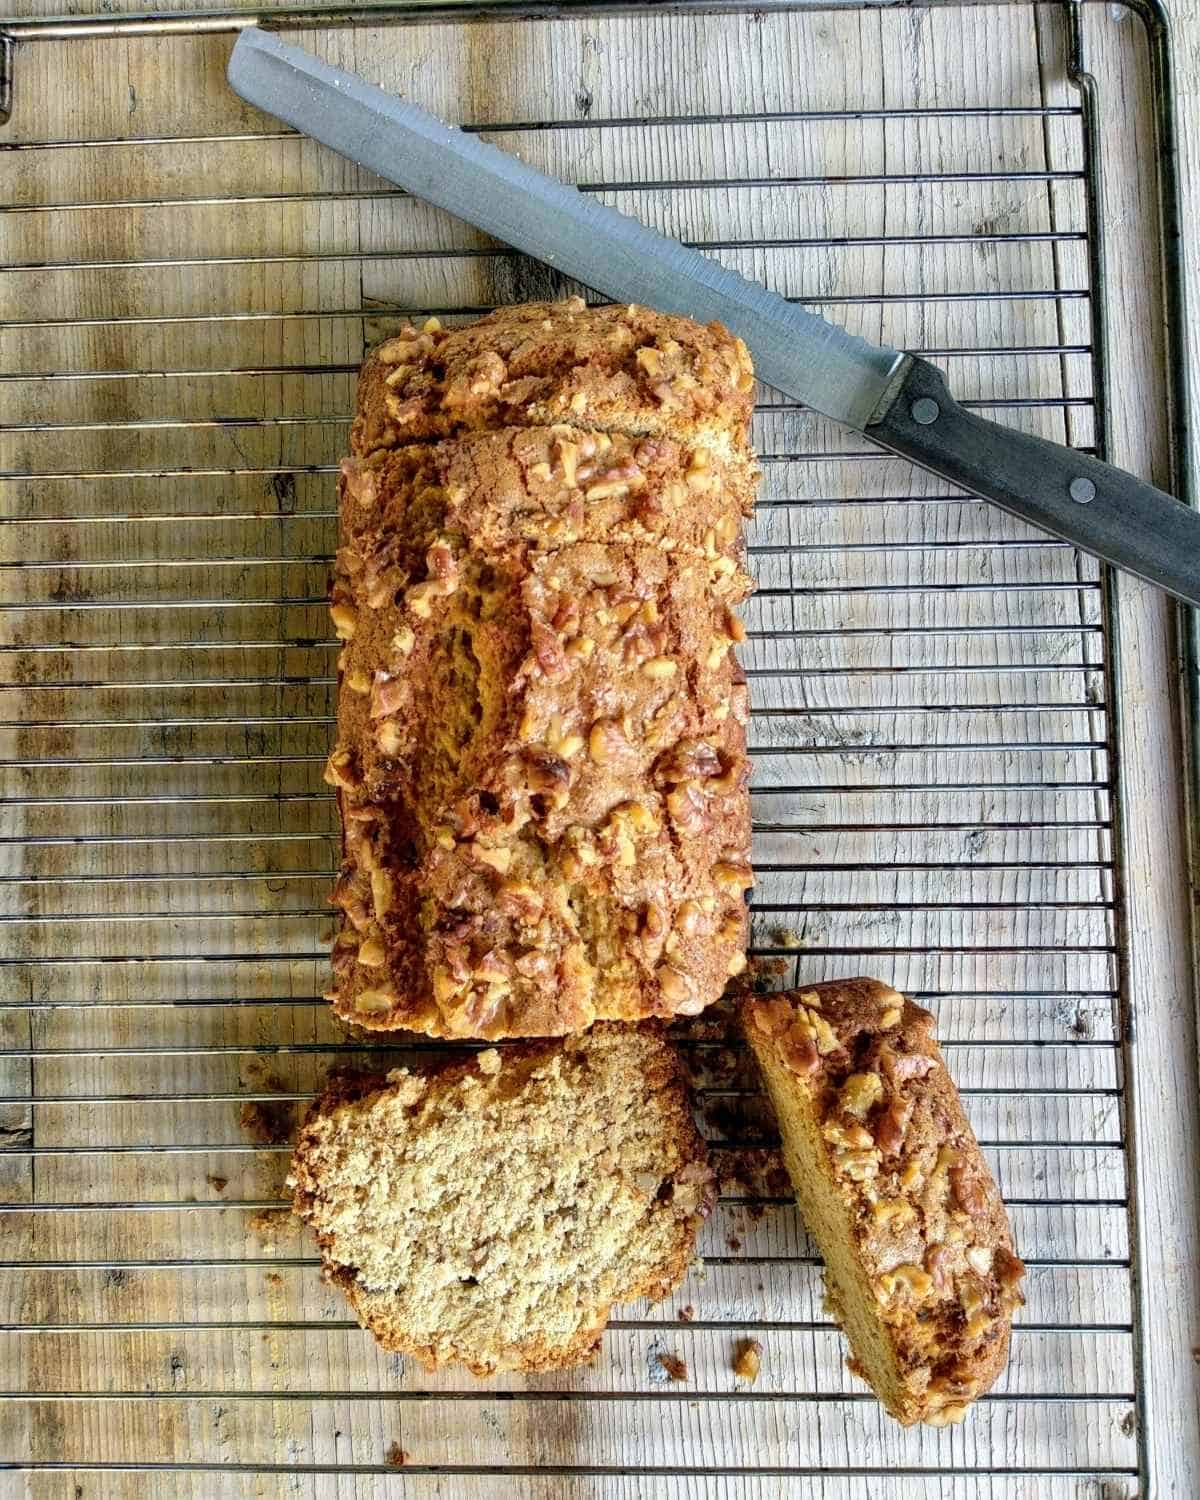 A-Banana Bread-Loaf-on-a tray on a ligh wood table. The loaf is sliced showing inside